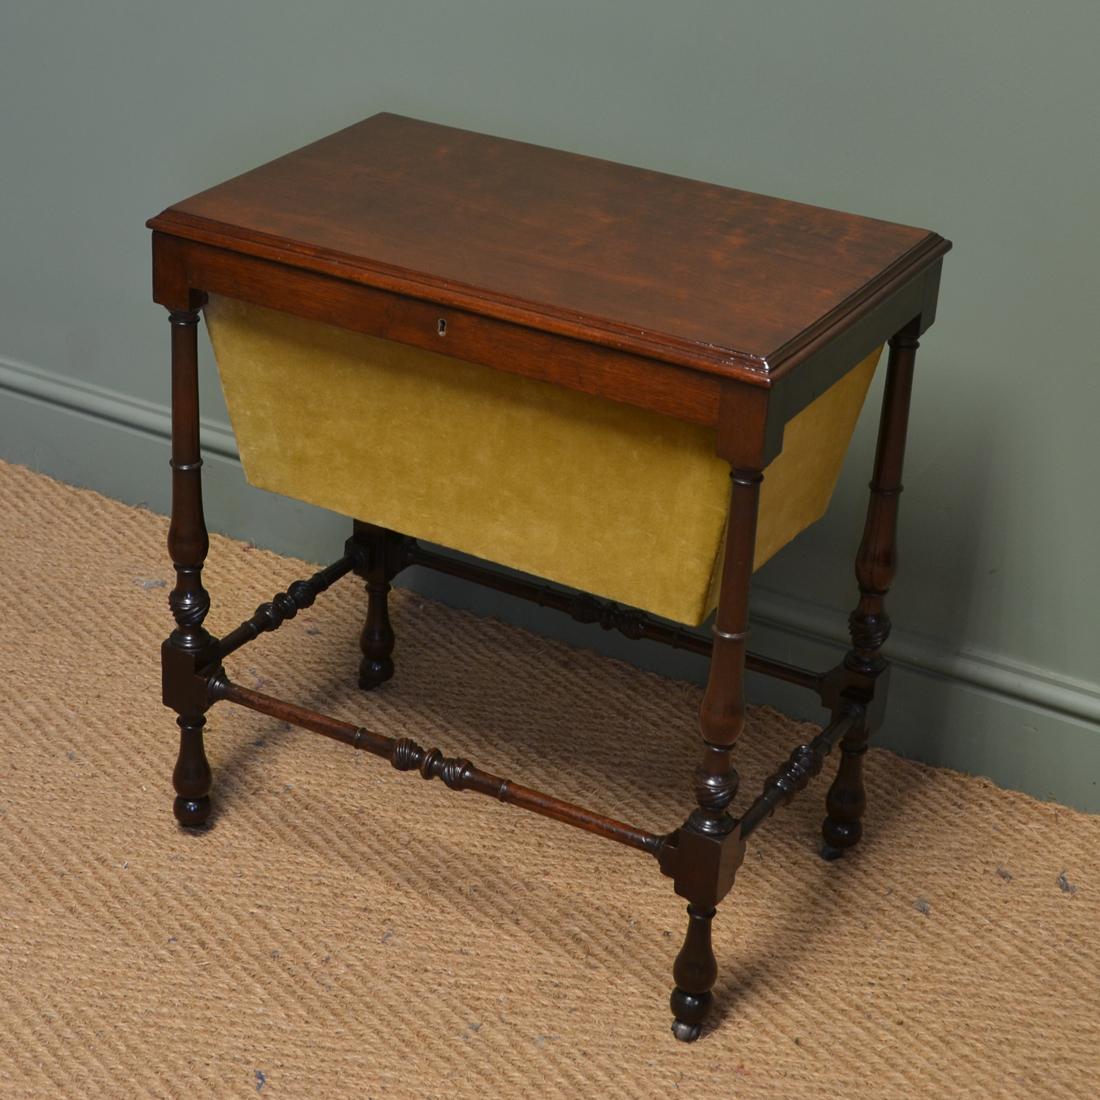 Small Edwardian mahogany antique work box / side table
This small Edwardian antique work box / side table dates from around 1900 and has a beautifully figured moulded lid that lifts up to reveal a lined interior and posses a retailers label “The